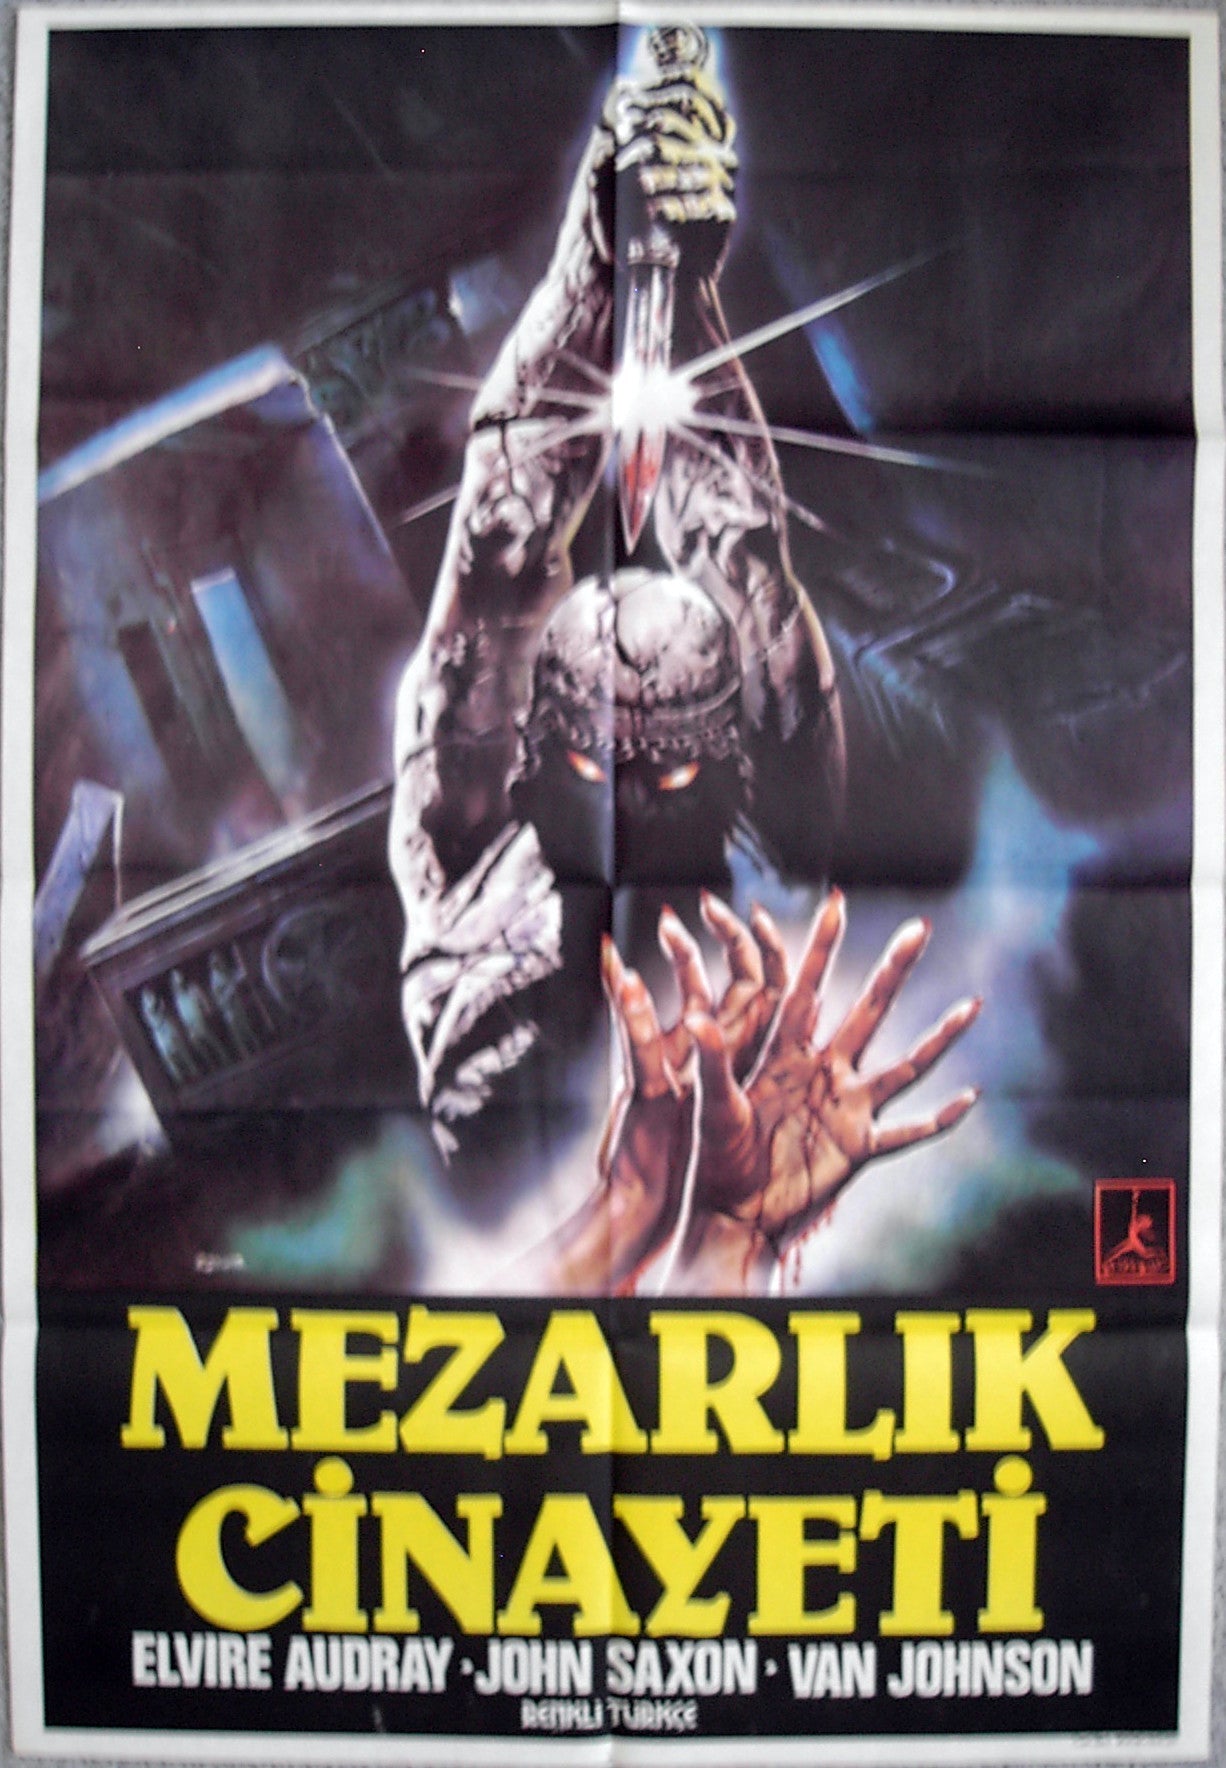 SCORPION WITH TWO TAILS, THE - Turkish poster